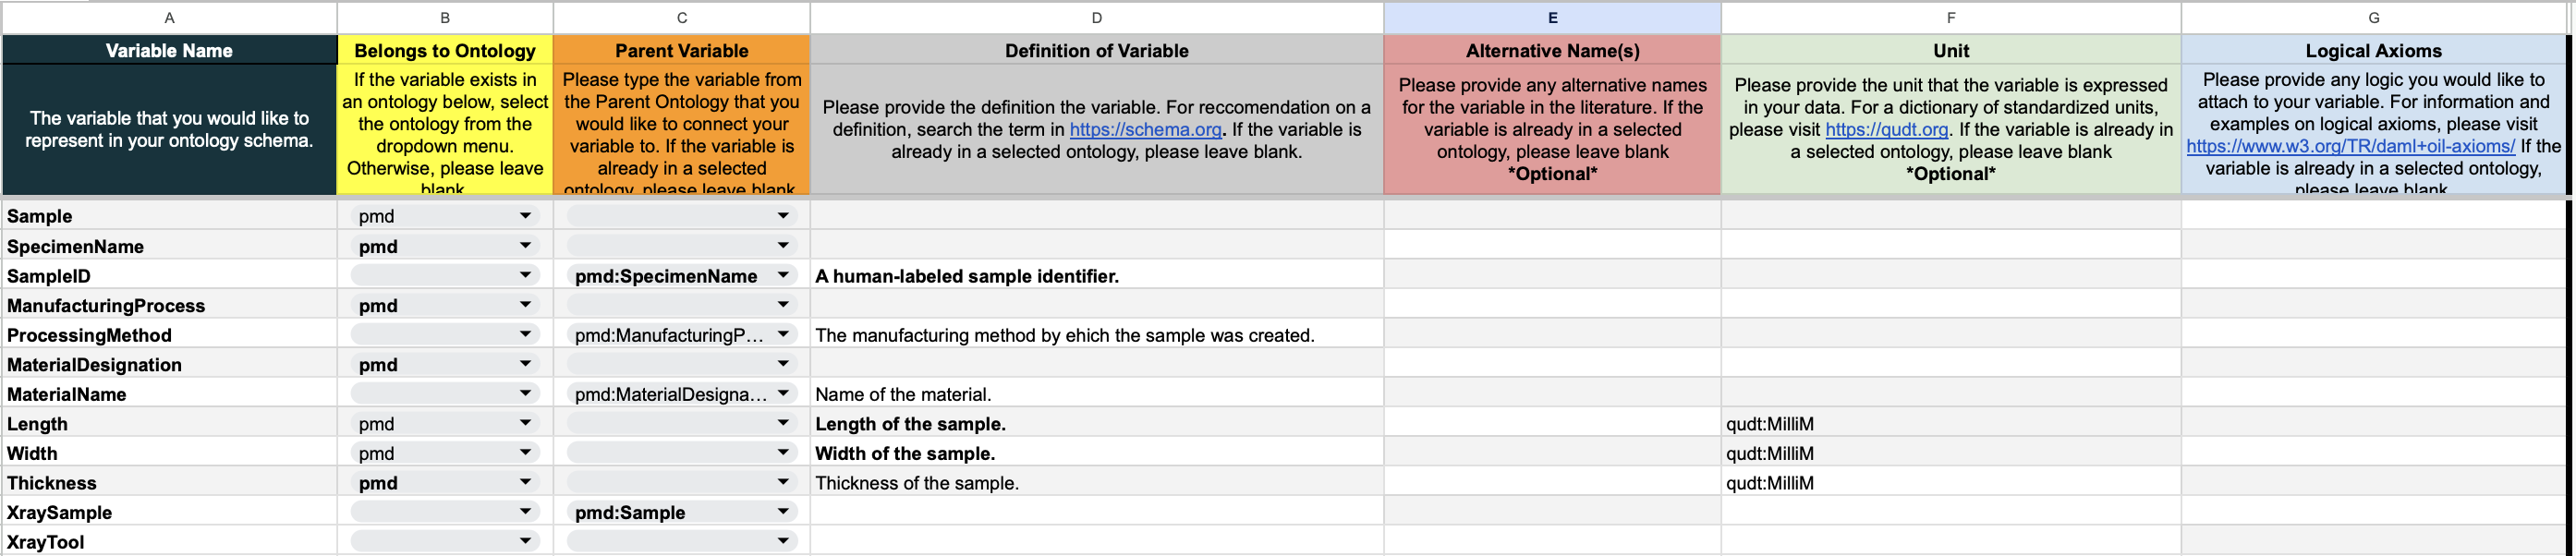 Variable Definitions Sheet